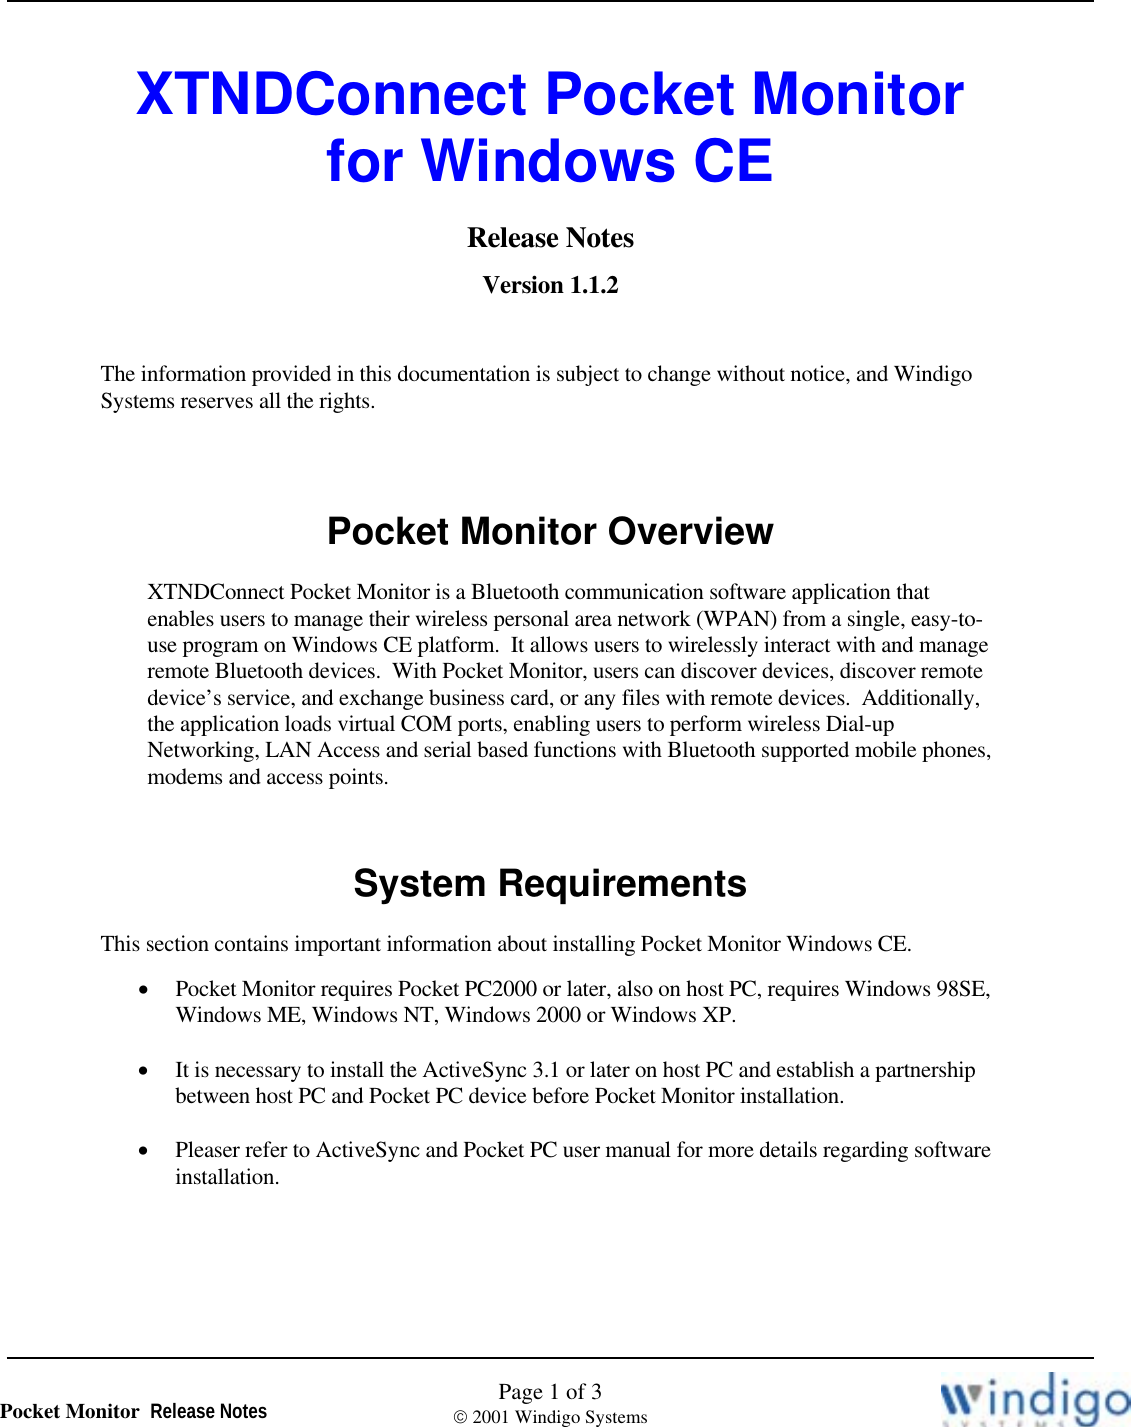   XTNDConnect Pocket Monitor for Windows CE   Release Notes Version 1.1.2  The information provided in this documentation is subject to change without notice, and Windigo Systems reserves all the rights.      Pocket Monitor Overview  XTNDConnect Pocket Monitor is a Bluetooth communication software application that enables users to manage their wireless personal area network (WPAN) from a single, easy-to-use program on Windows CE platform.  It allows users to wirelessly interact with and manage remote Bluetooth devices.  With Pocket Monitor, users can discover devices, discover remote device’s service, and exchange business card, or any files with remote devices.  Additionally, the application loads virtual COM ports, enabling users to perform wireless Dial-up Networking, LAN Access and serial based functions with Bluetooth supported mobile phones, modems and access points.    System Requirements  This section contains important information about installing Pocket Monitor Windows CE. •  Pocket Monitor requires Pocket PC2000 or later, also on host PC, requires Windows 98SE, Windows ME, Windows NT, Windows 2000 or Windows XP.  •  It is necessary to install the ActiveSync 3.1 or later on host PC and establish a partnership between host PC and Pocket PC device before Pocket Monitor installation.   •  Pleaser refer to ActiveSync and Pocket PC user manual for more details regarding software installation.  Page 1 of 3  2001 Windigo Systems  Pocket Monitor  Release Notes 